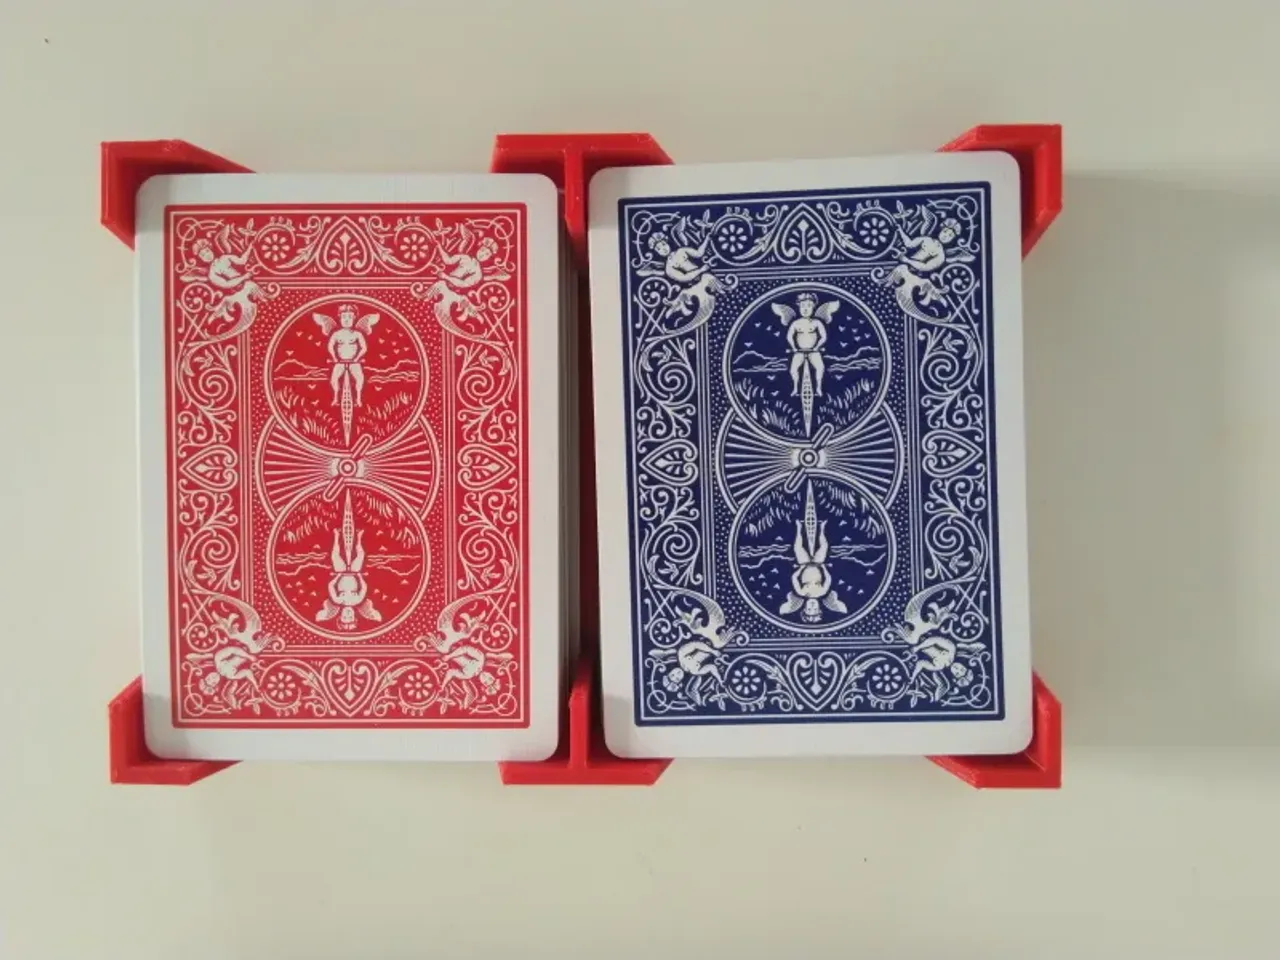 3D Printable Playing Card Wooden Box (Support Free) by Lazy Bear